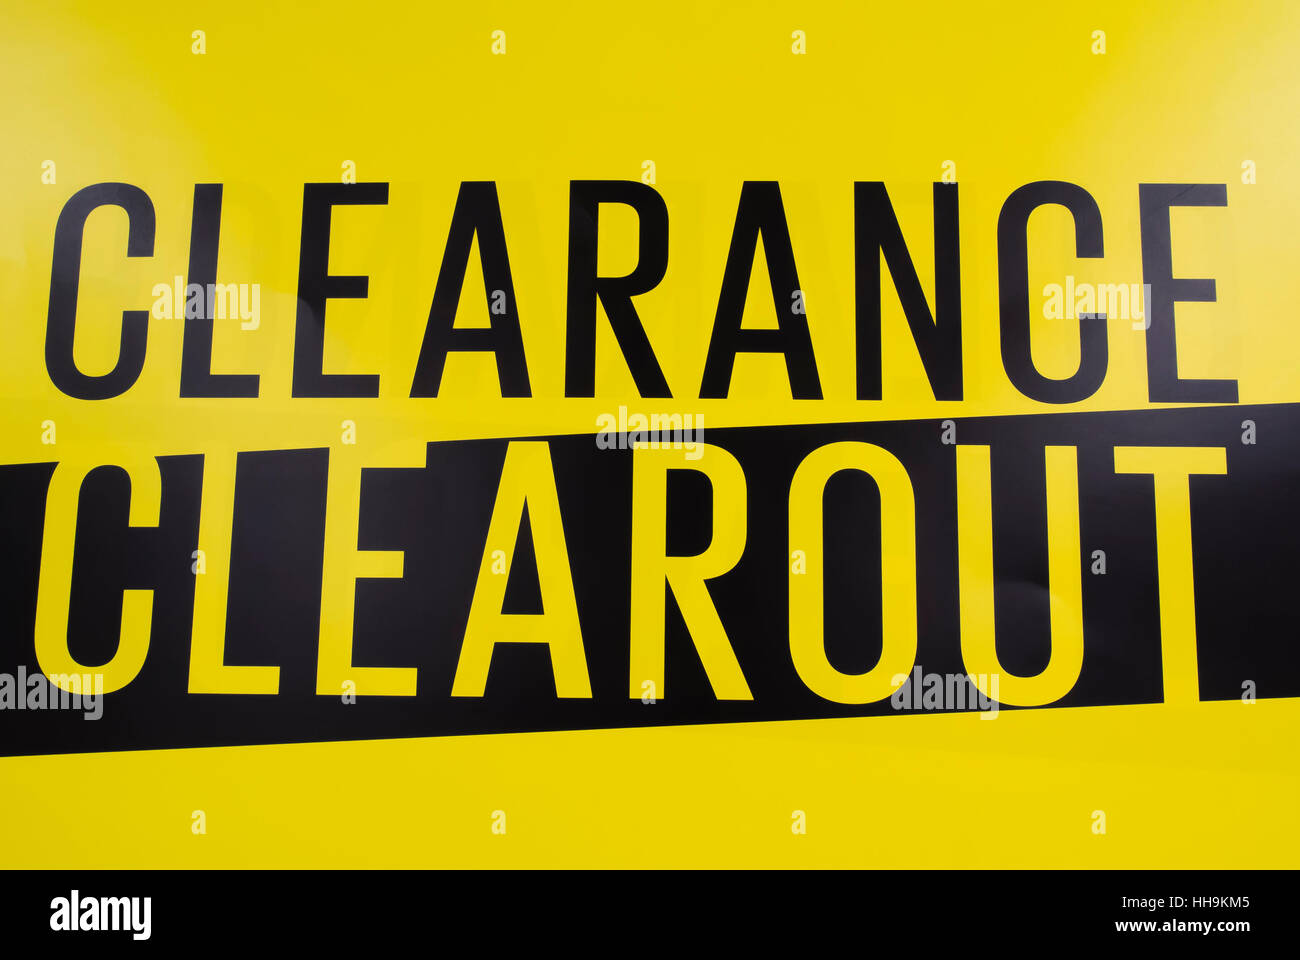 Clearance Clearout Sign in Store Stock Photo